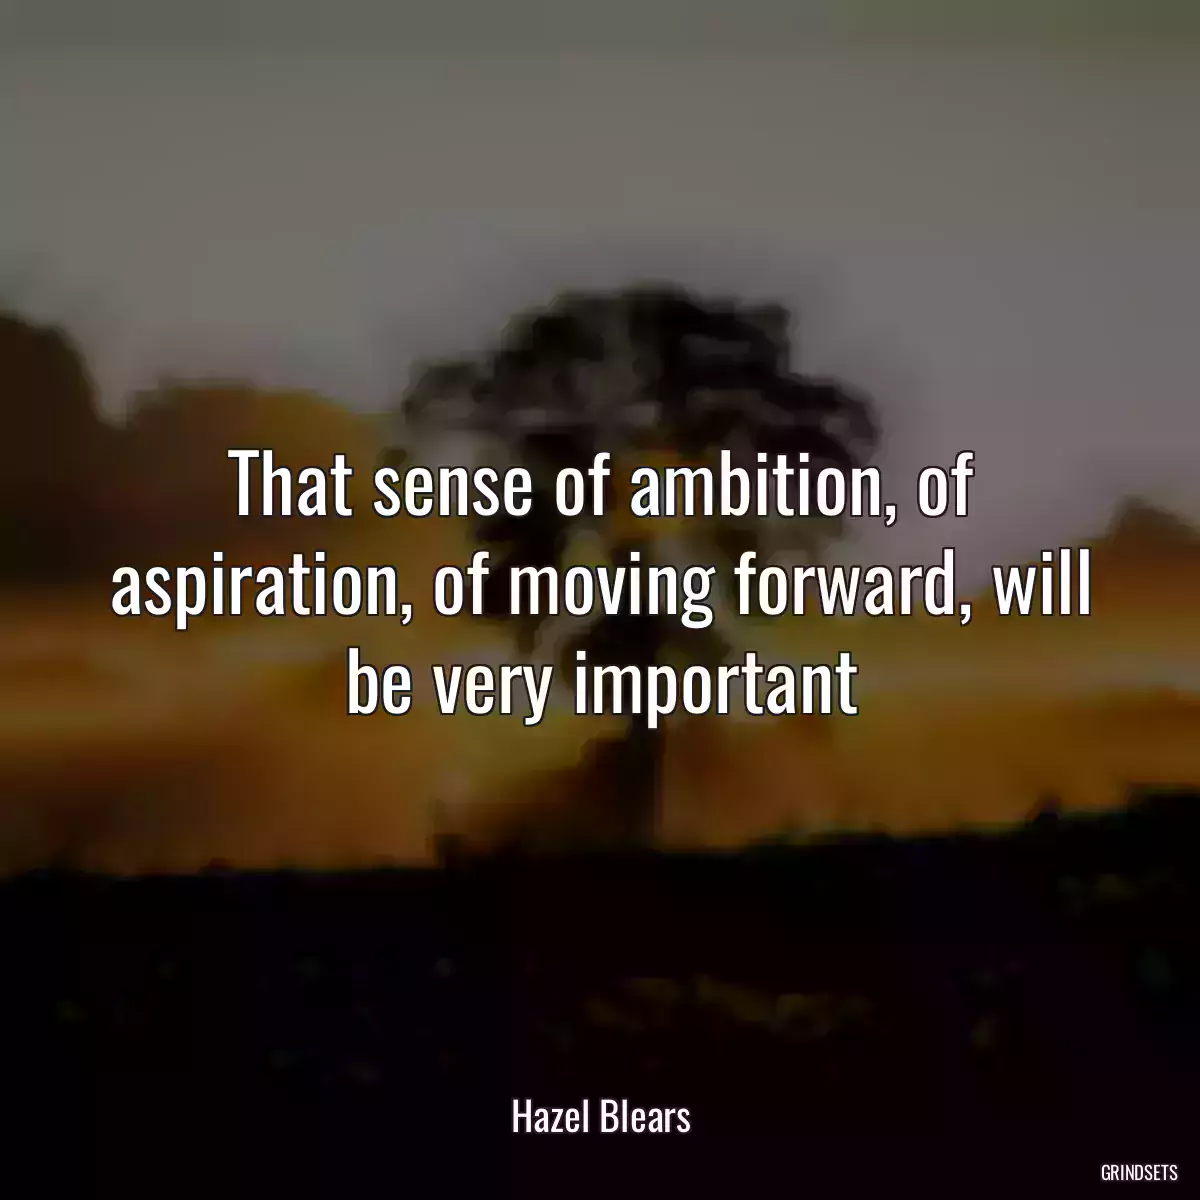 That sense of ambition, of aspiration, of moving forward, will be very important